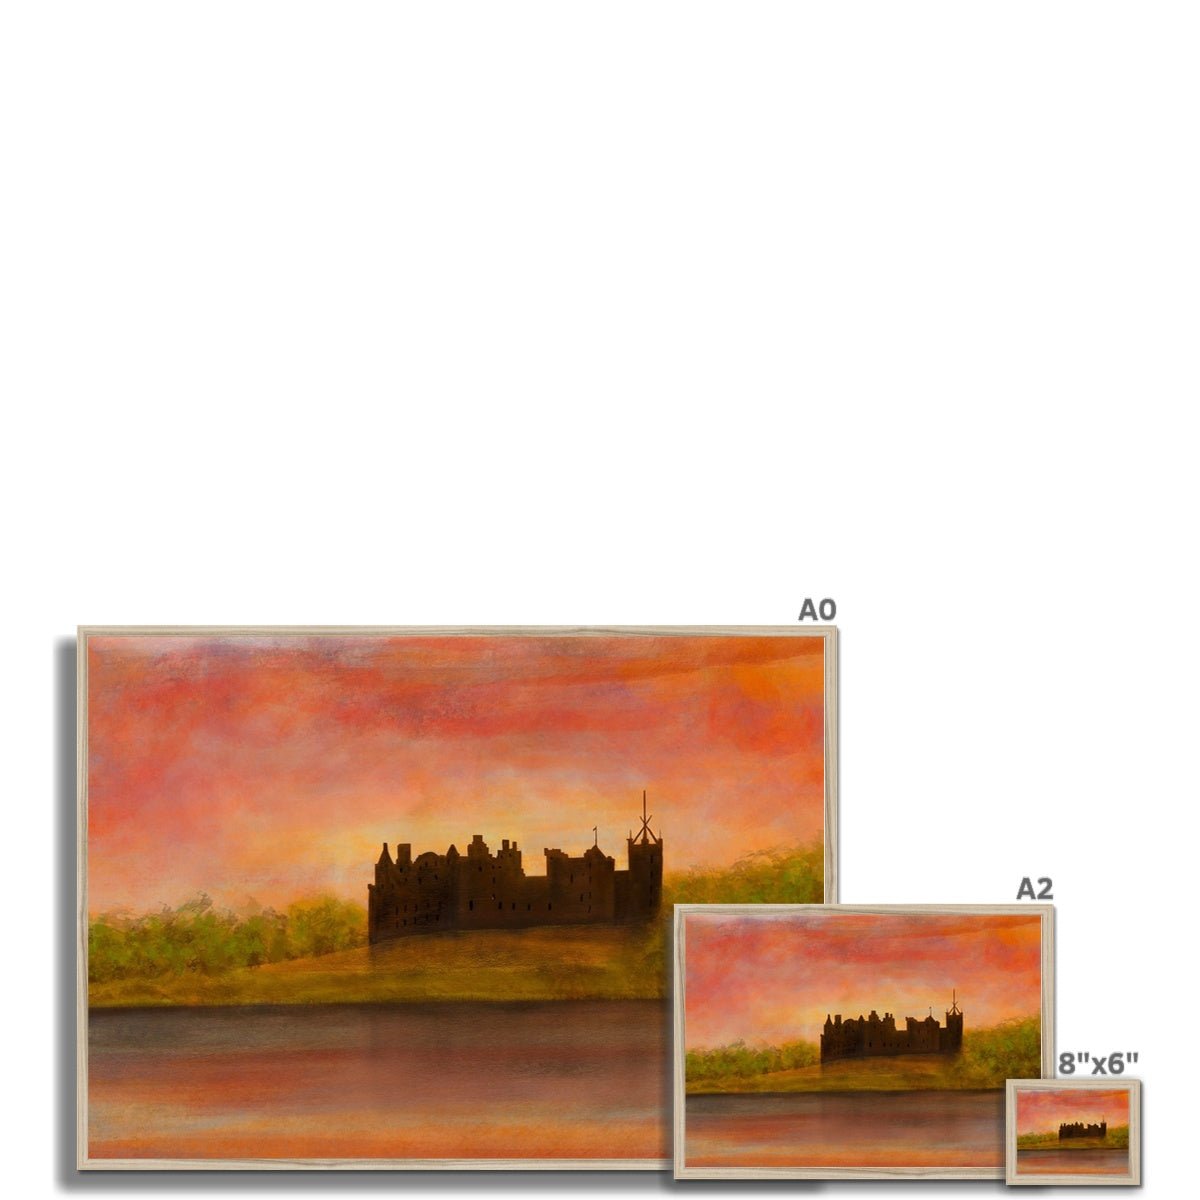 Linlithgow Palace Dusk Painting | Framed Prints From Scotland-Framed Prints-Historic & Iconic Scotland Art Gallery-Paintings, Prints, Homeware, Art Gifts From Scotland By Scottish Artist Kevin Hunter